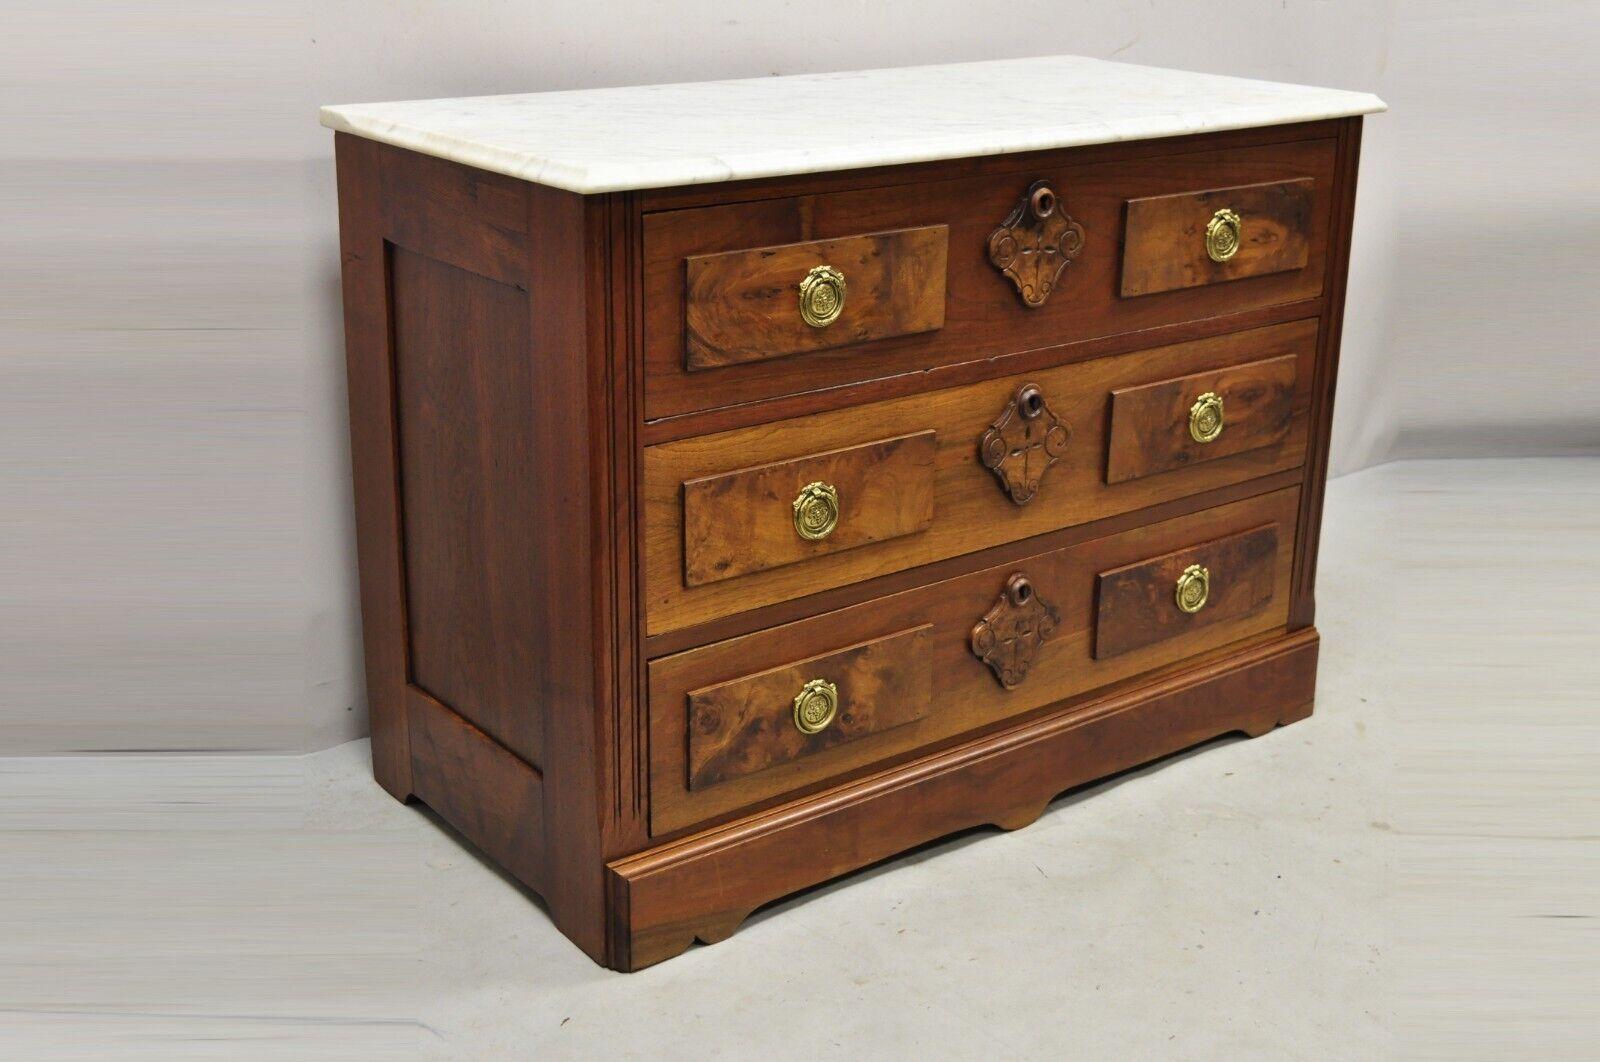 Antique Eastlake Victorian white marble top burl walnut 3 drawer commode dresser chest. Item features a white marble top, beautiful wood grain, 3 drawers, very nice antique item, quality American craftsmanship. Circa 19th century. Measurements: 29